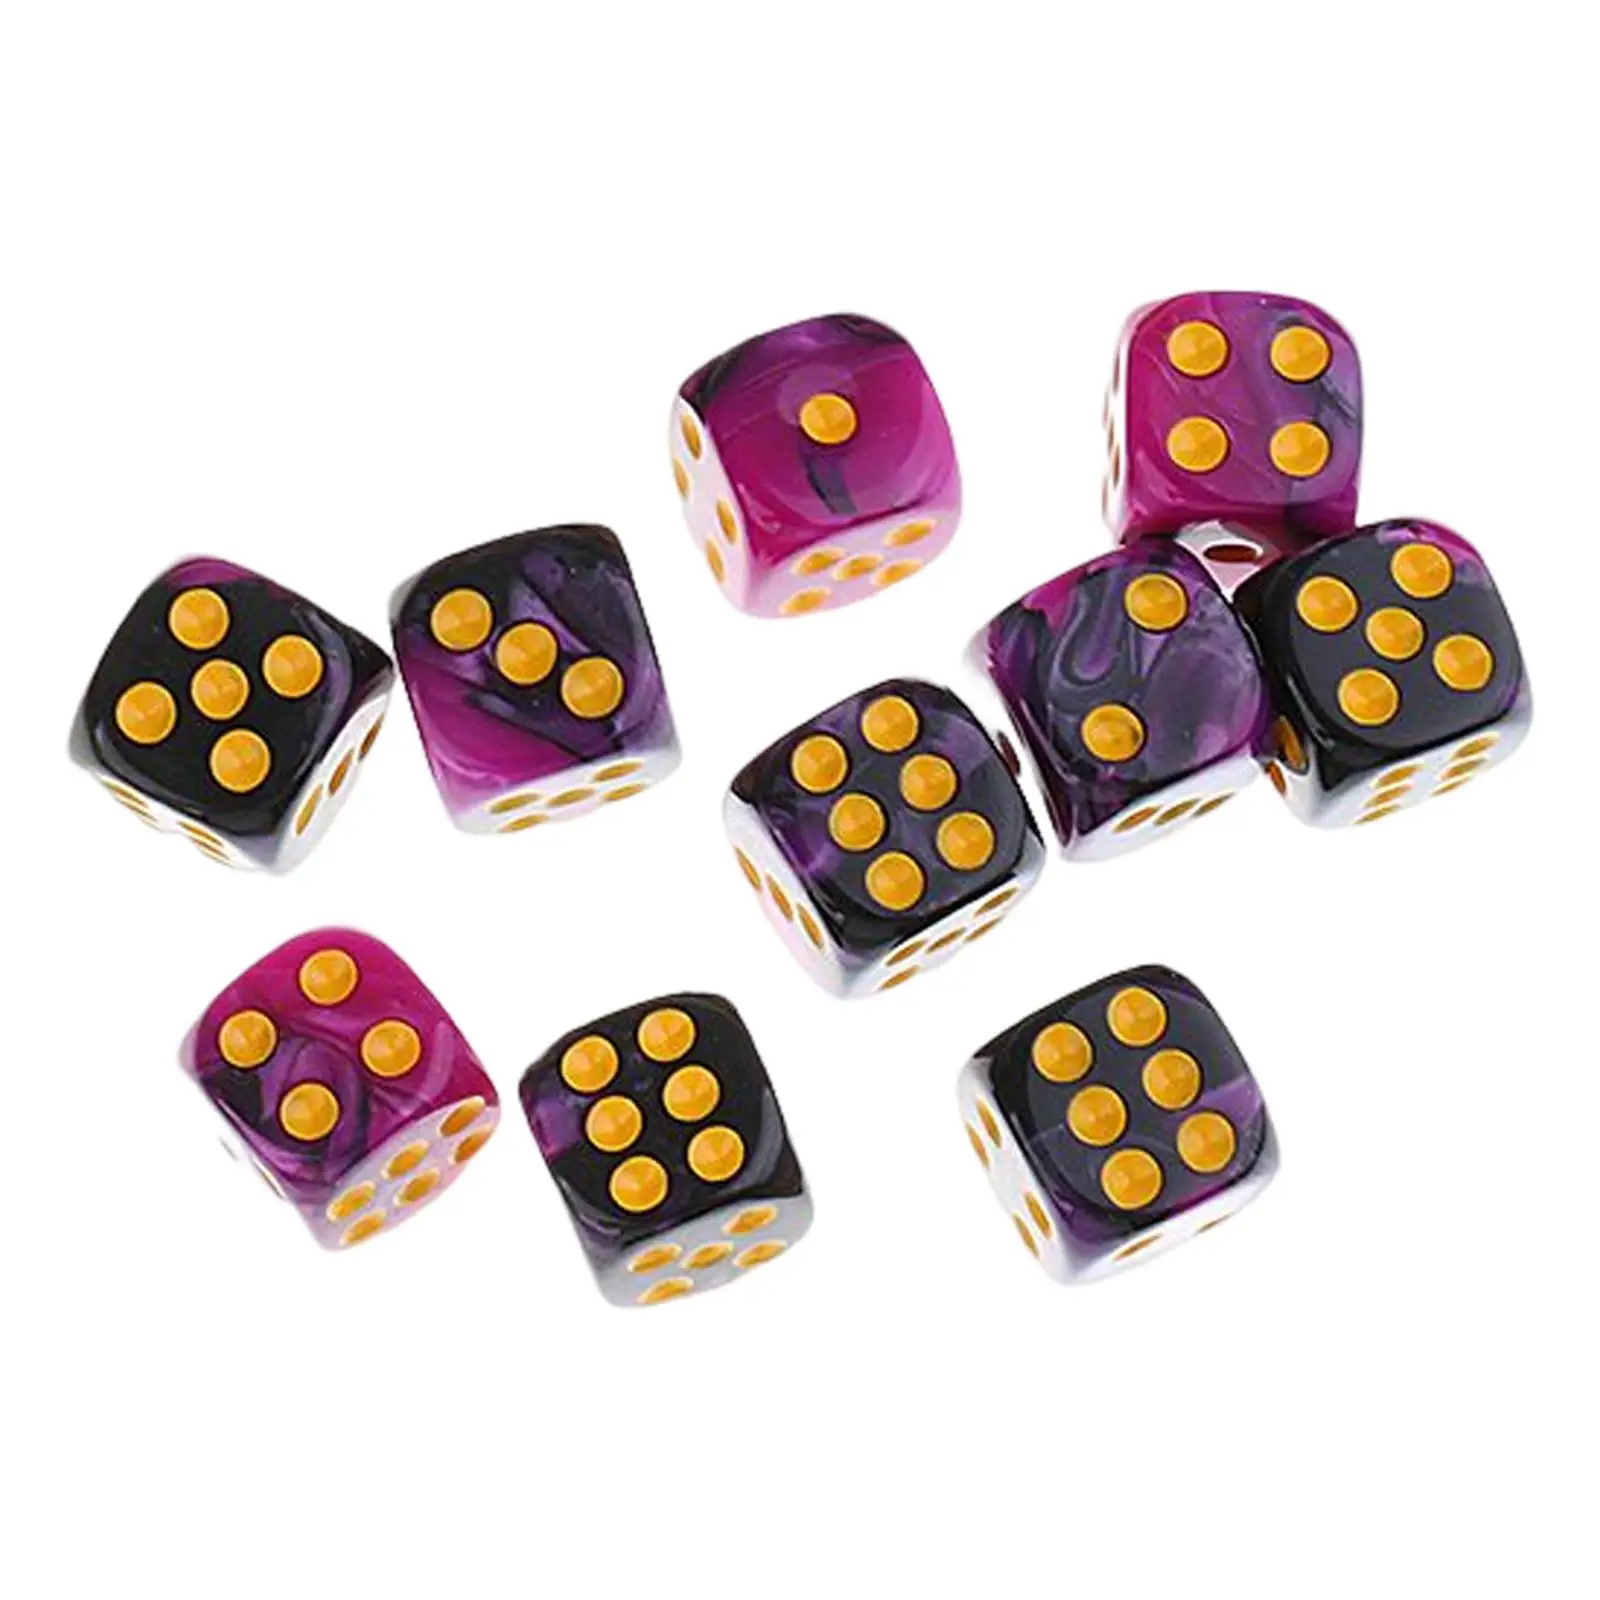 Set of 10 Six Sided Dices Set Toys Opaque for DND RPG Math Teaching Board Game